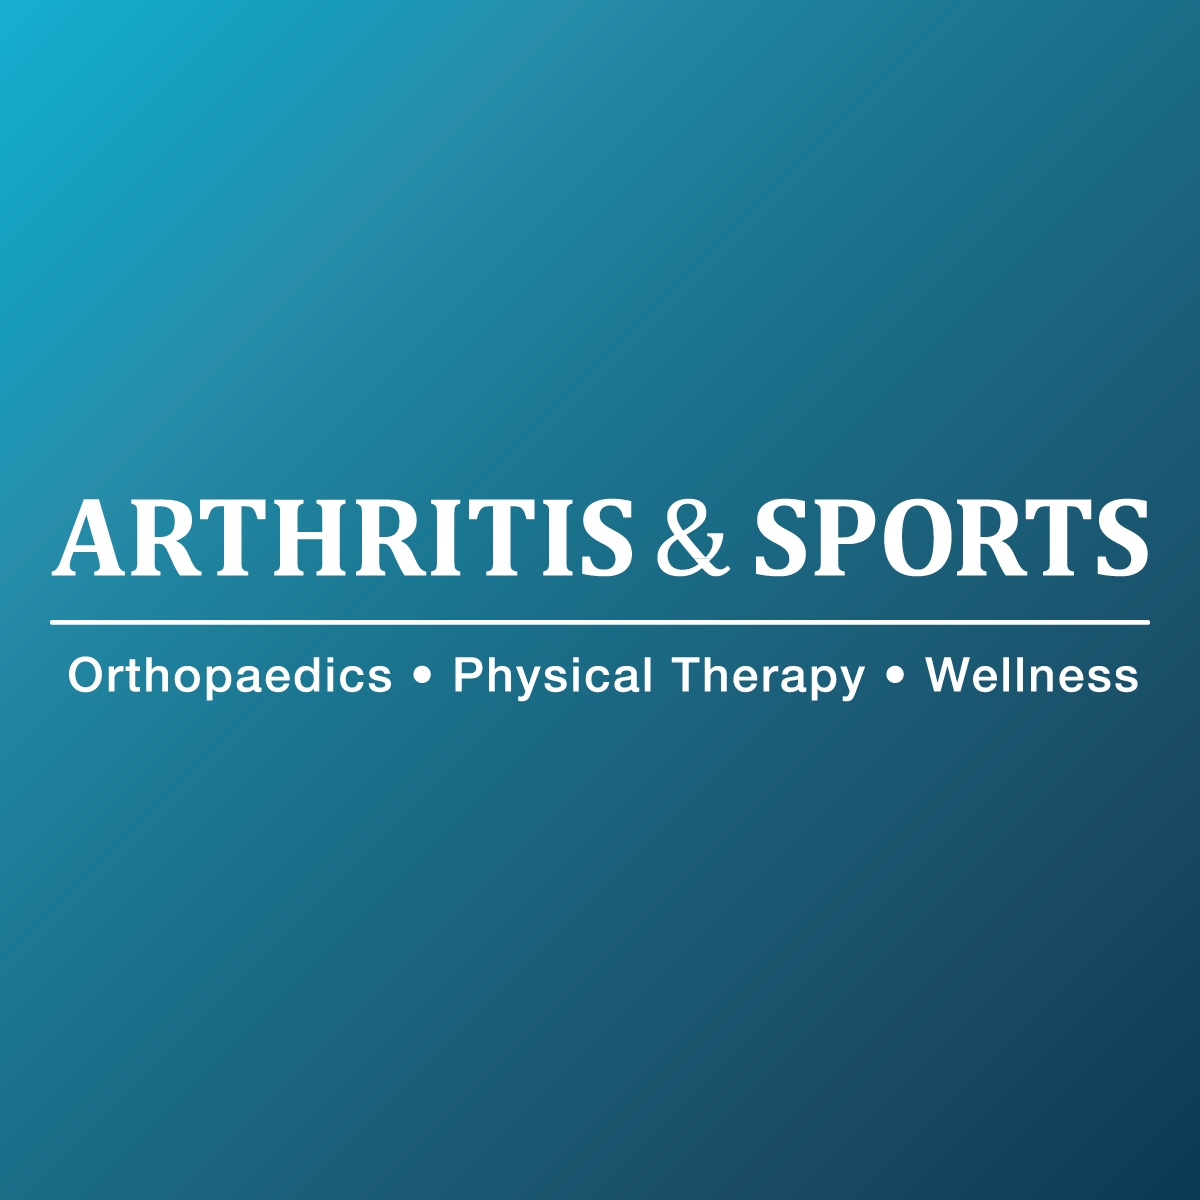 Arthritis & Sports Highlights its Promise to Quality Physical Therapy Care